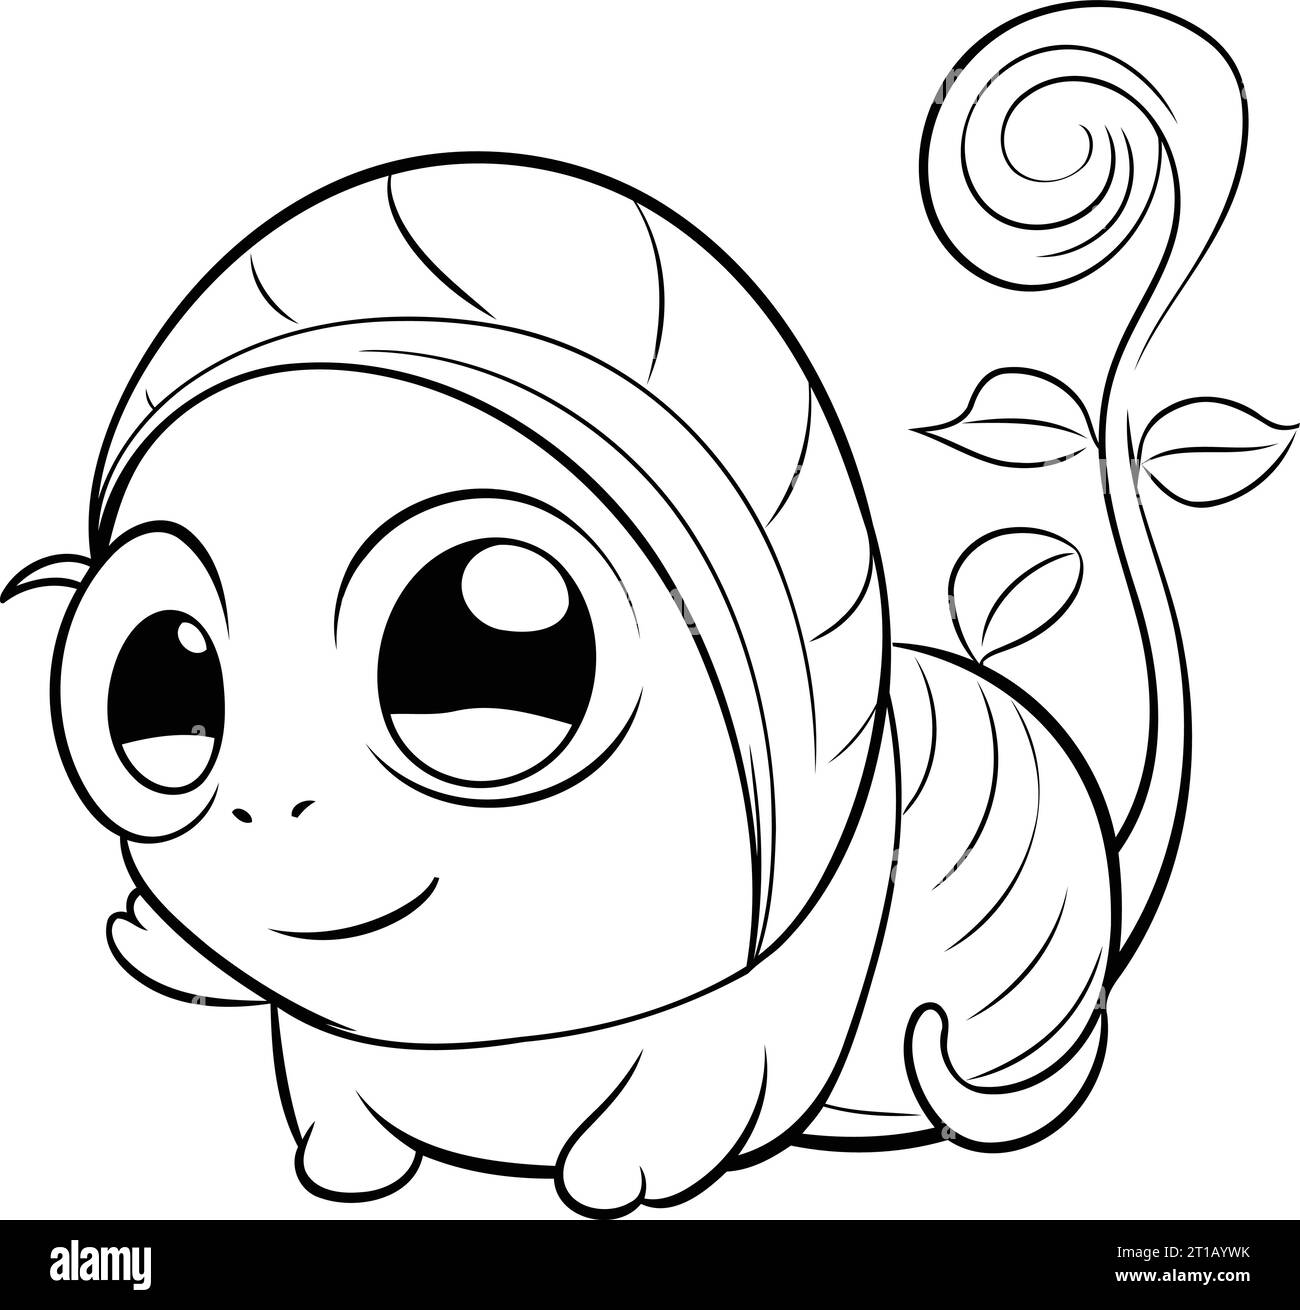 Cute cartoon caterpillar. Coloring book page for kids Stock Vector ...